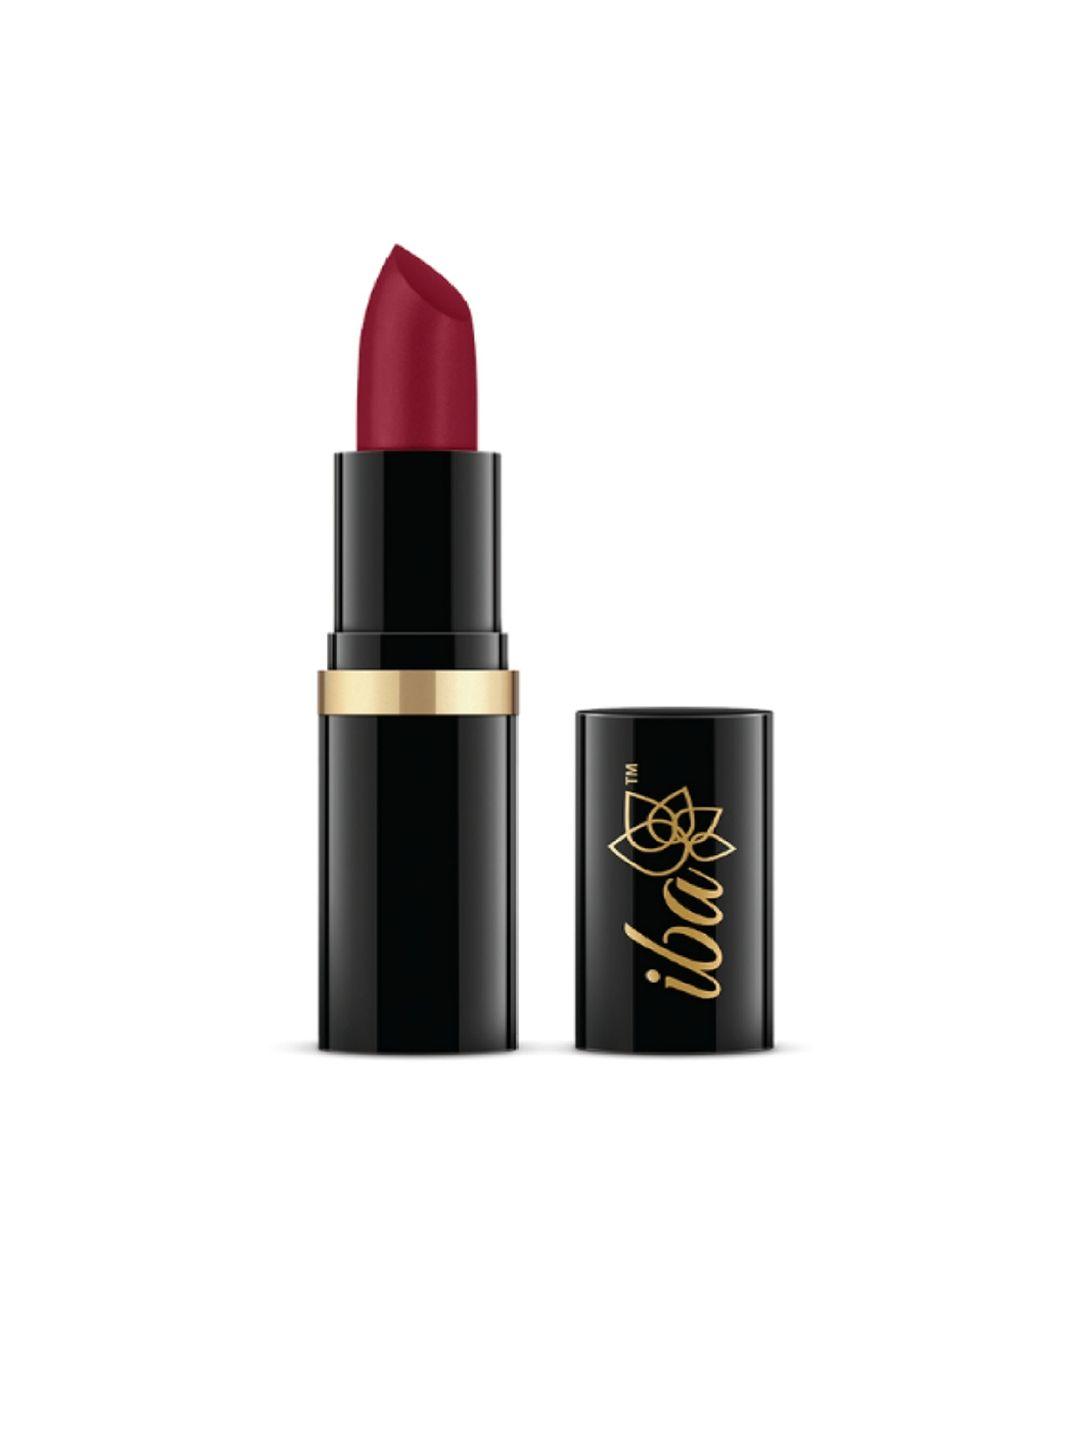 iba red moisture rich lipstick - a68 mystery red